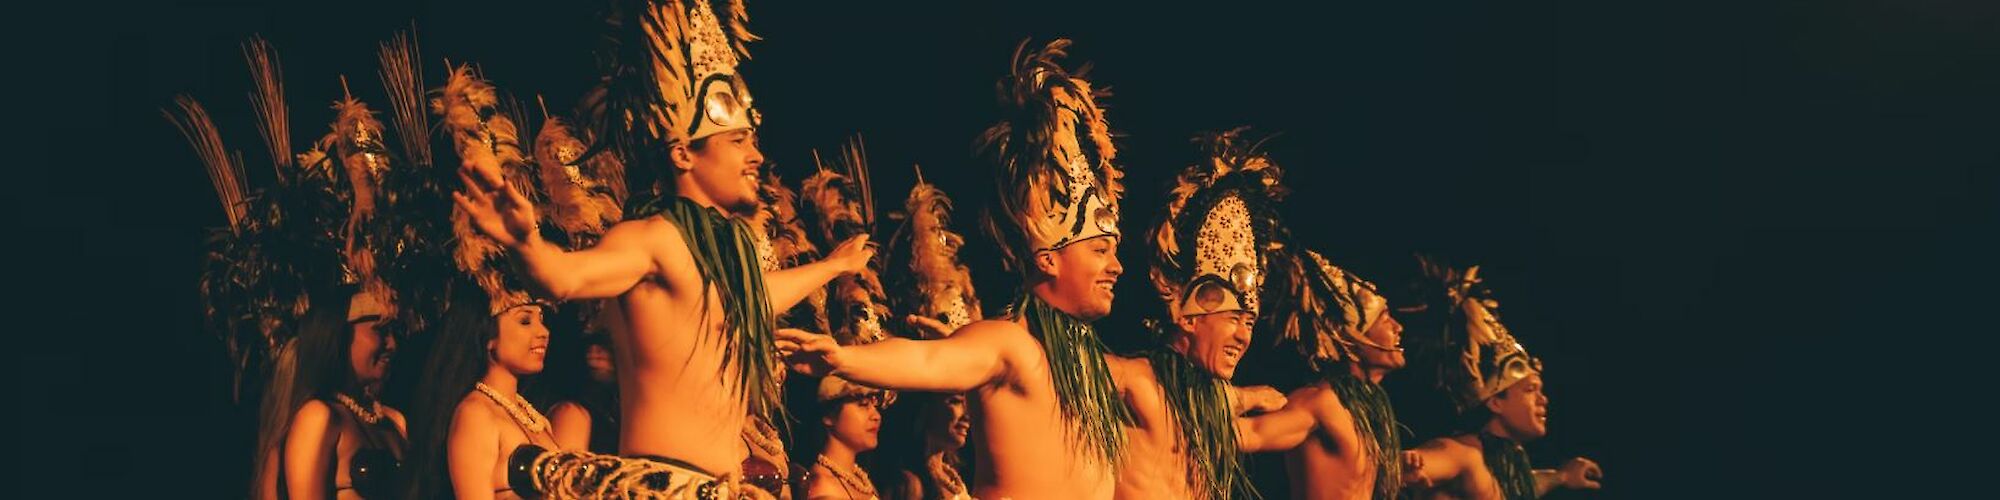 A group of people in traditional attire, performing a cultural dance with feathered headdresses and grass skirts, set against a dark background.